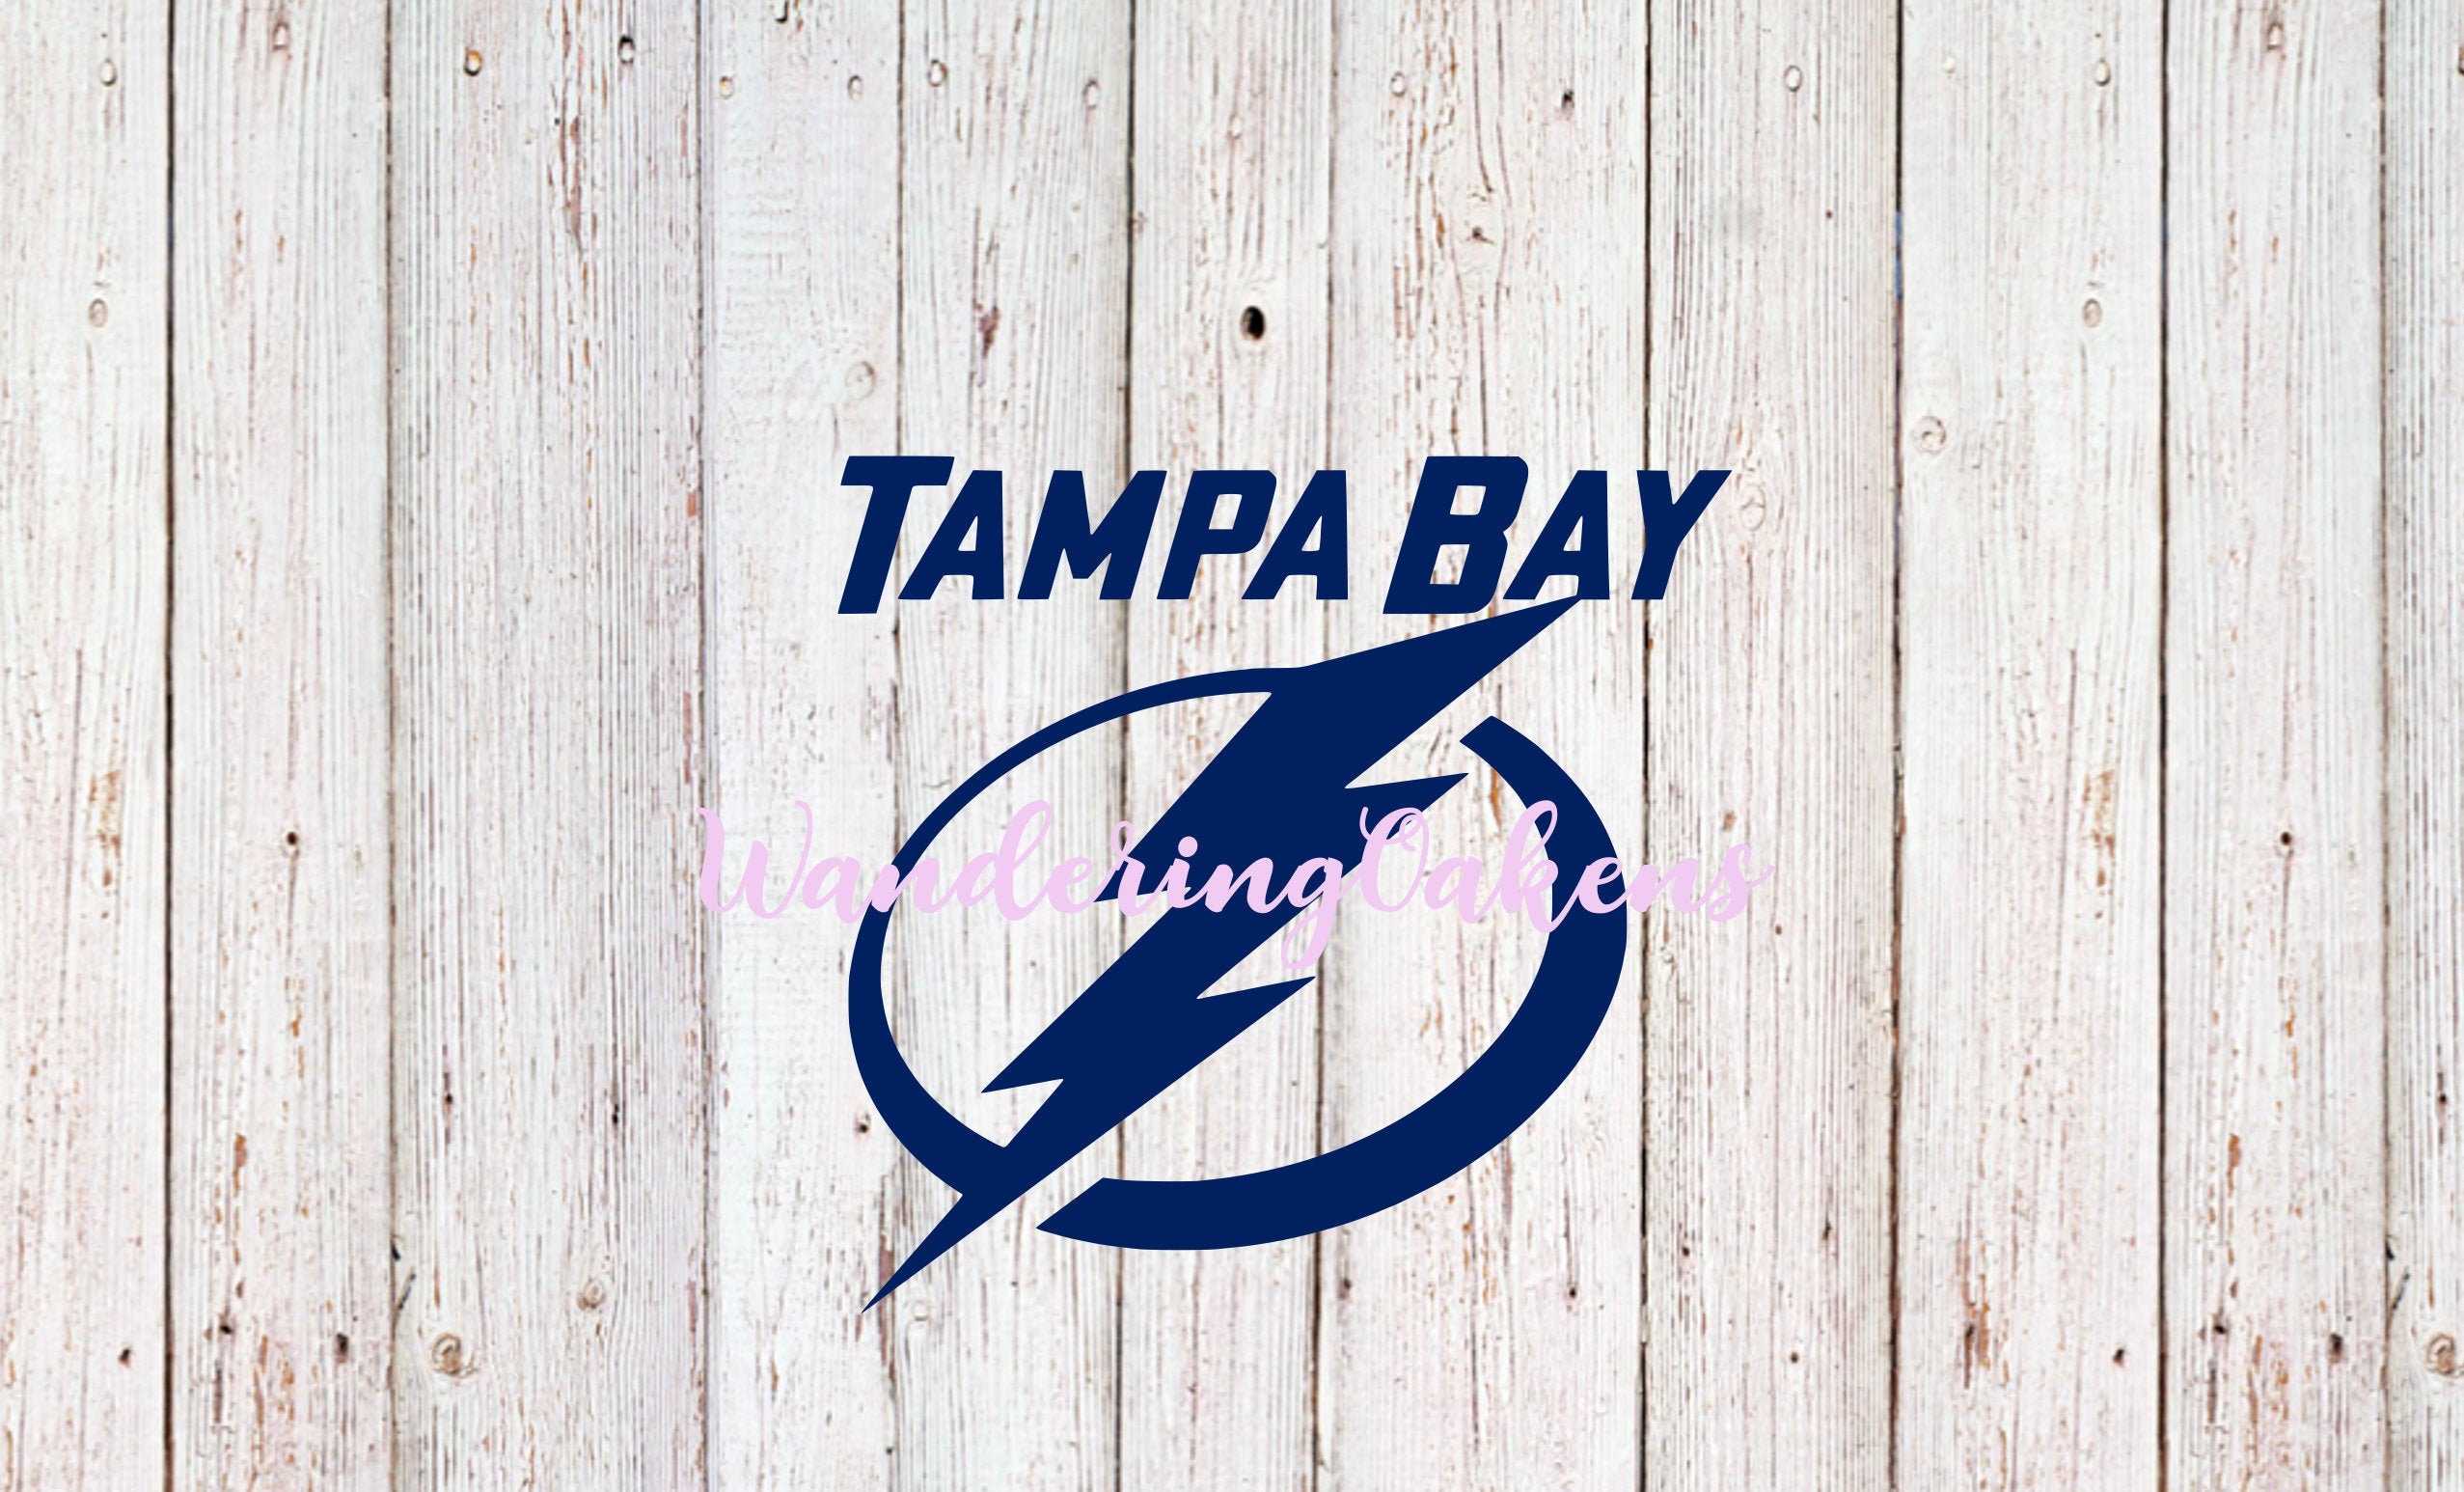 NHL Tampa Bay Lightning Eastern Conference Champions 2004-2022 shirt,  hoodie, sweater, long sleeve and tank top